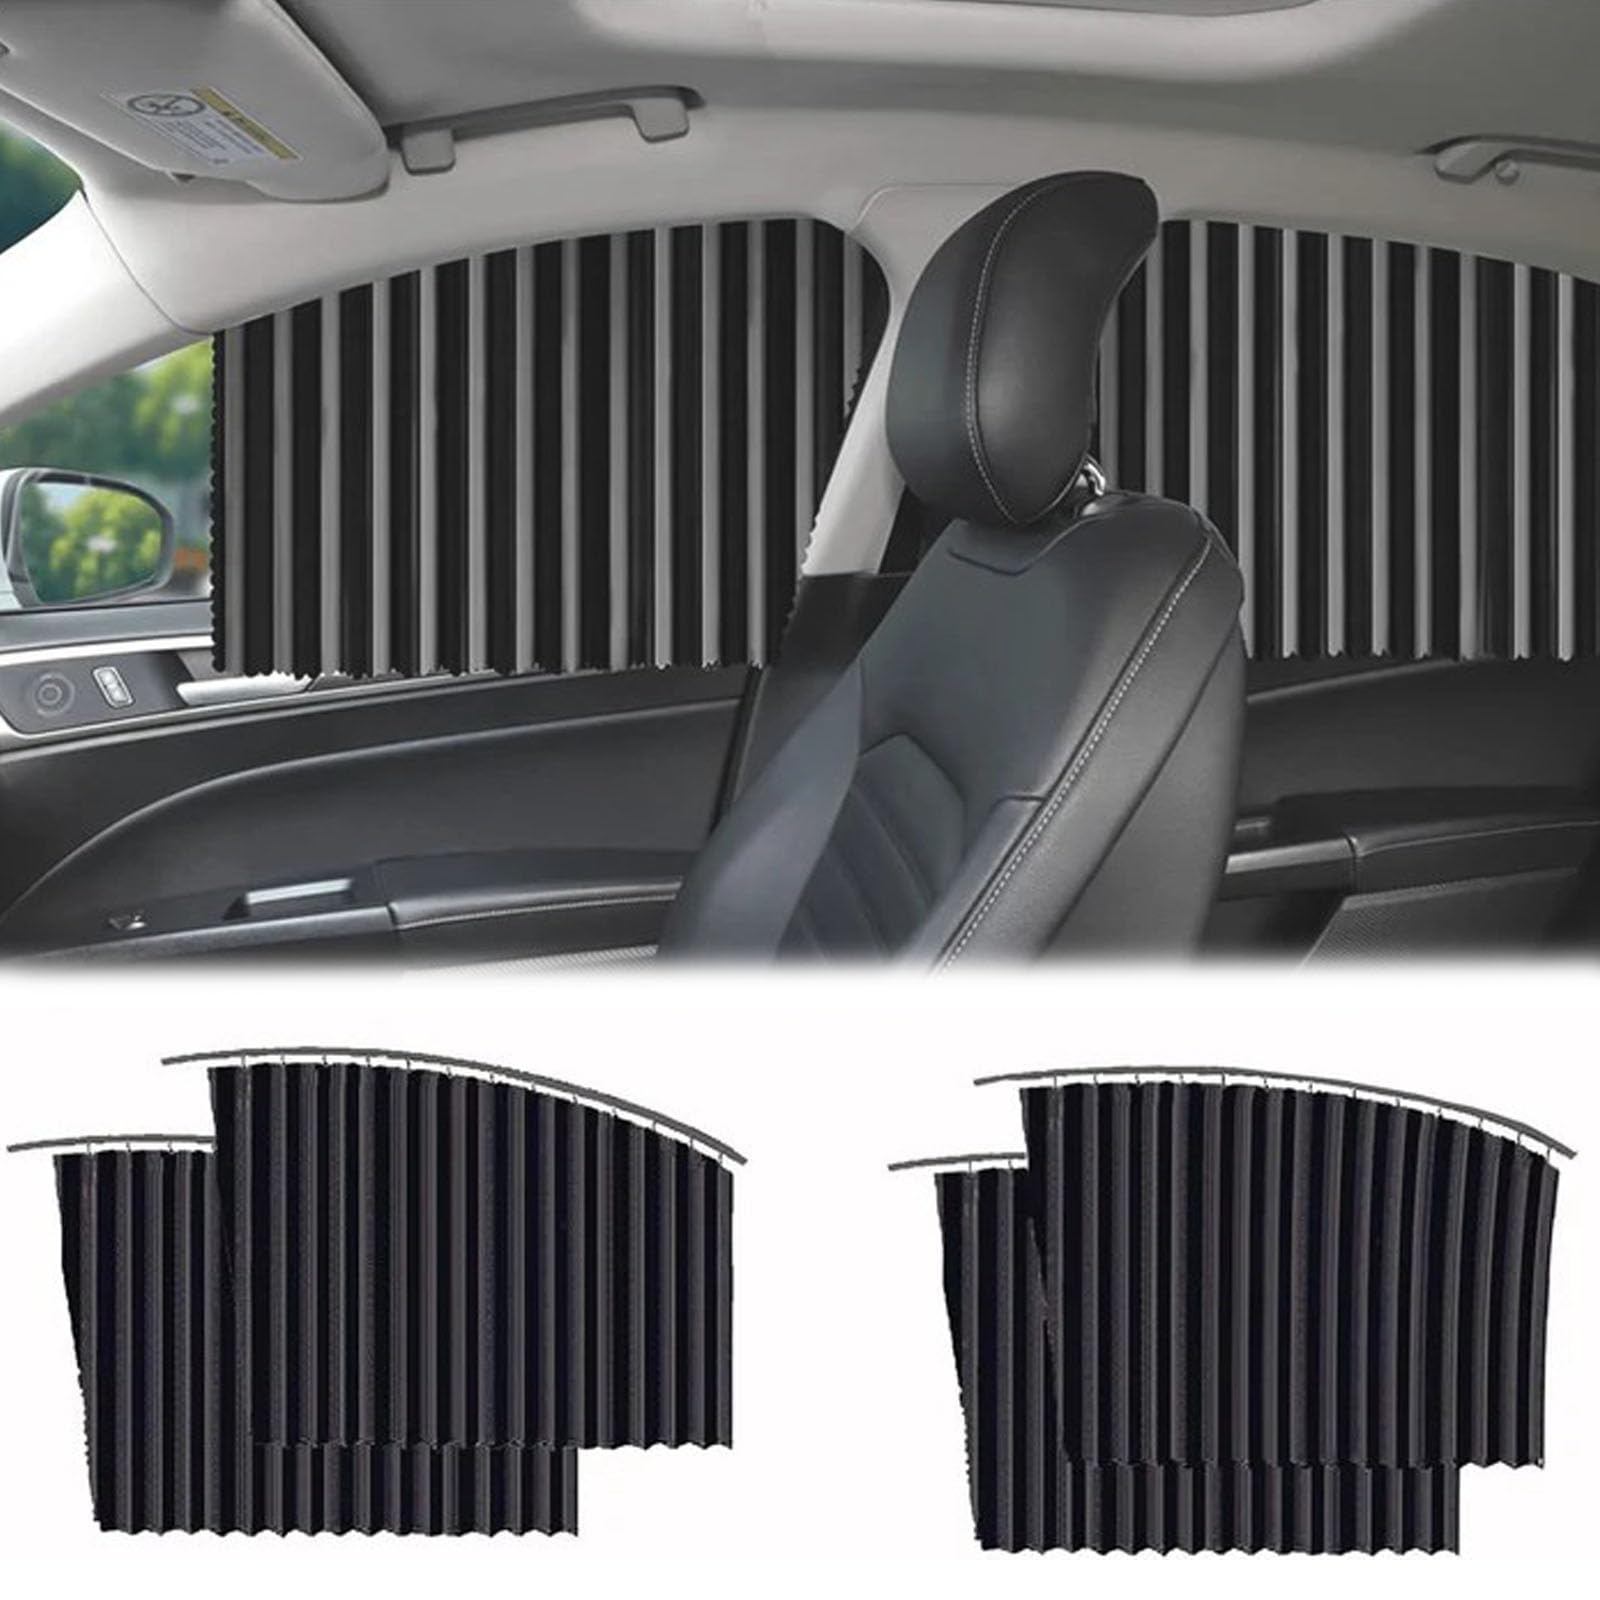 Byshade Universal Magnetic Car Window Shades, Byshade Car Side Window Sun Shades， Magnetic Curtain Blinds Covers for Baby Sleeping Camping Accessories Sun Privacy Protection(Black,Front+Rear 4pcs) von HAPPYSHOPS